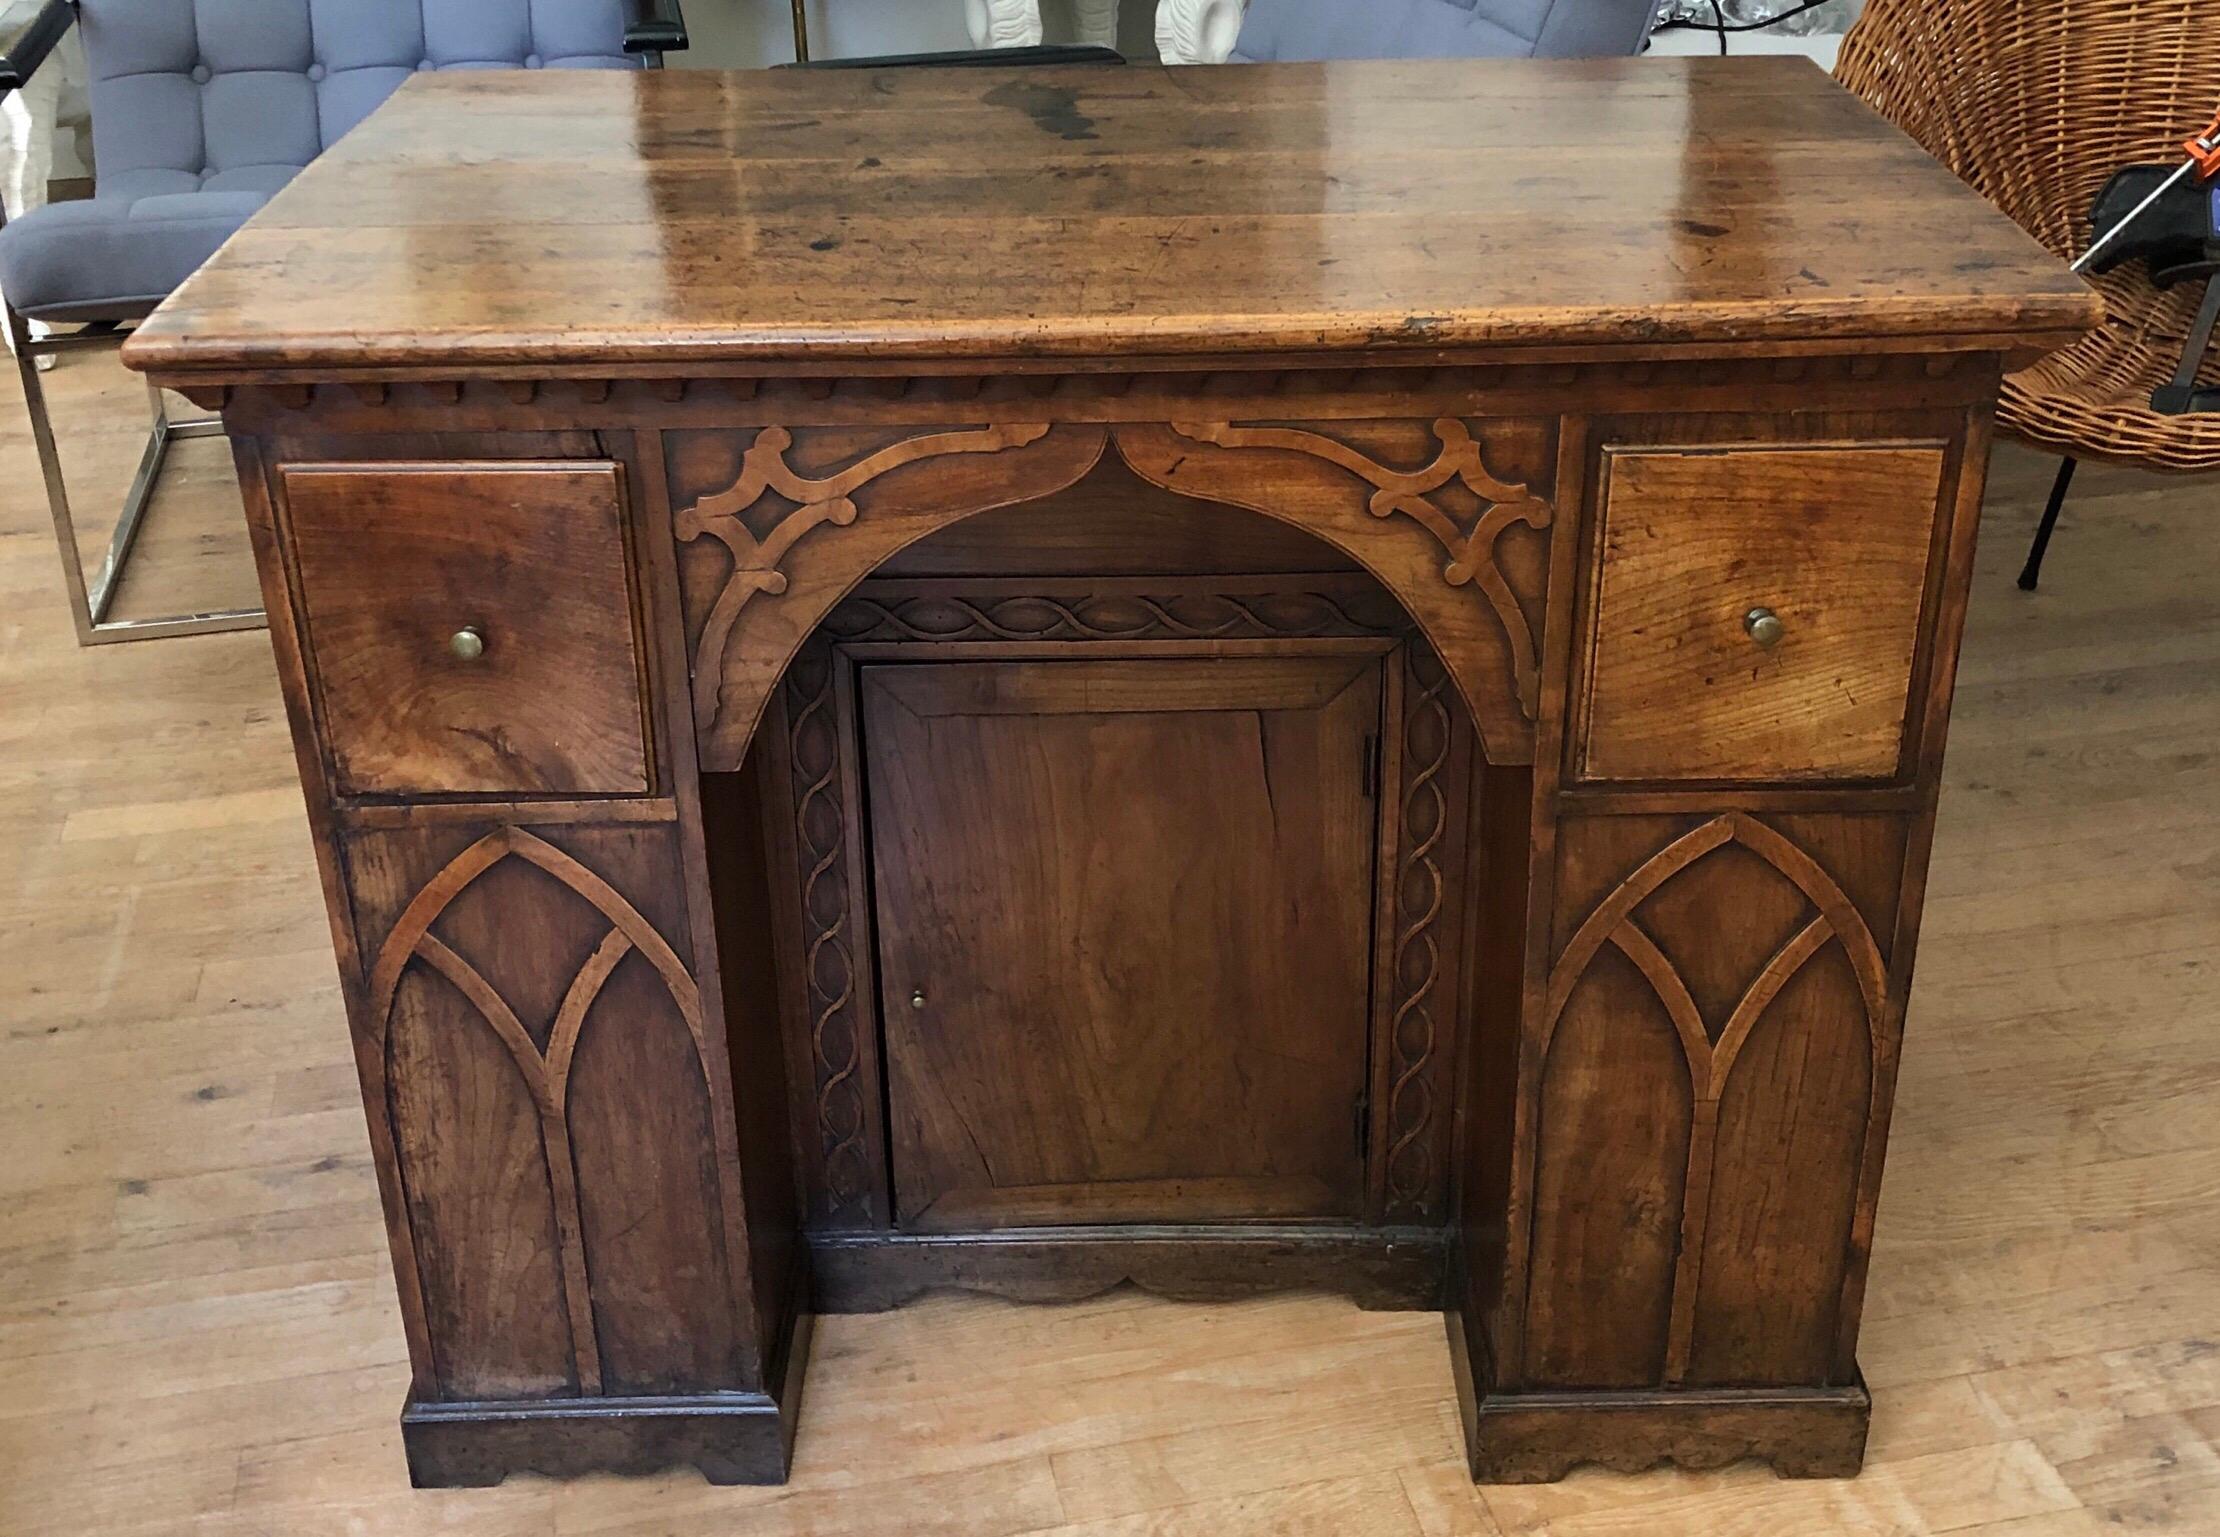 19th century neogothic fruitwood kneehole desk... Beautifully and thoughtfully restored.
It makes a great nightstand due to its diminutive scale.